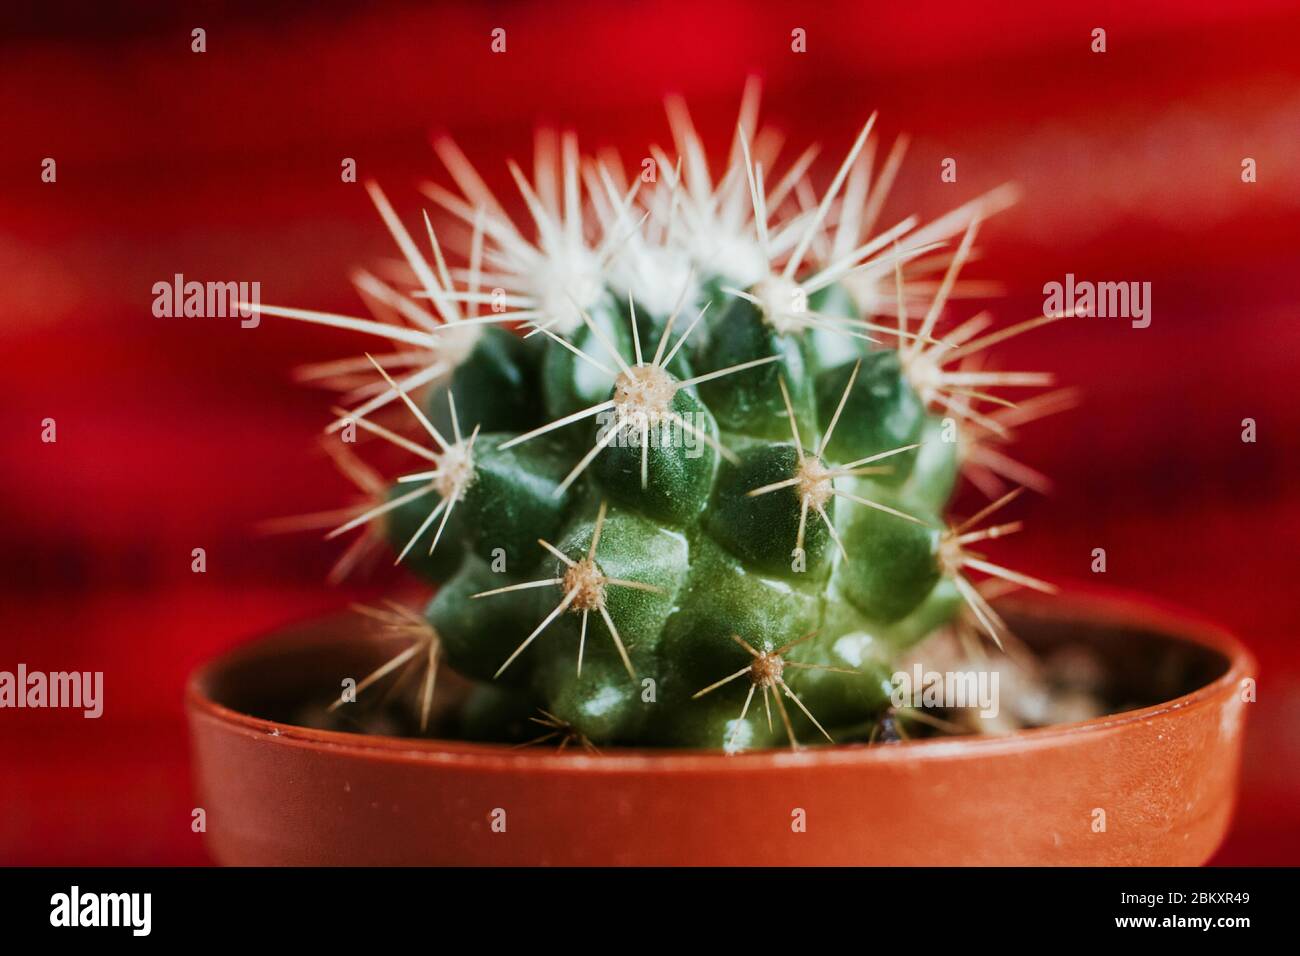 Mexican cactus in the pot, plant in Mexico mexican culture Stock Photo